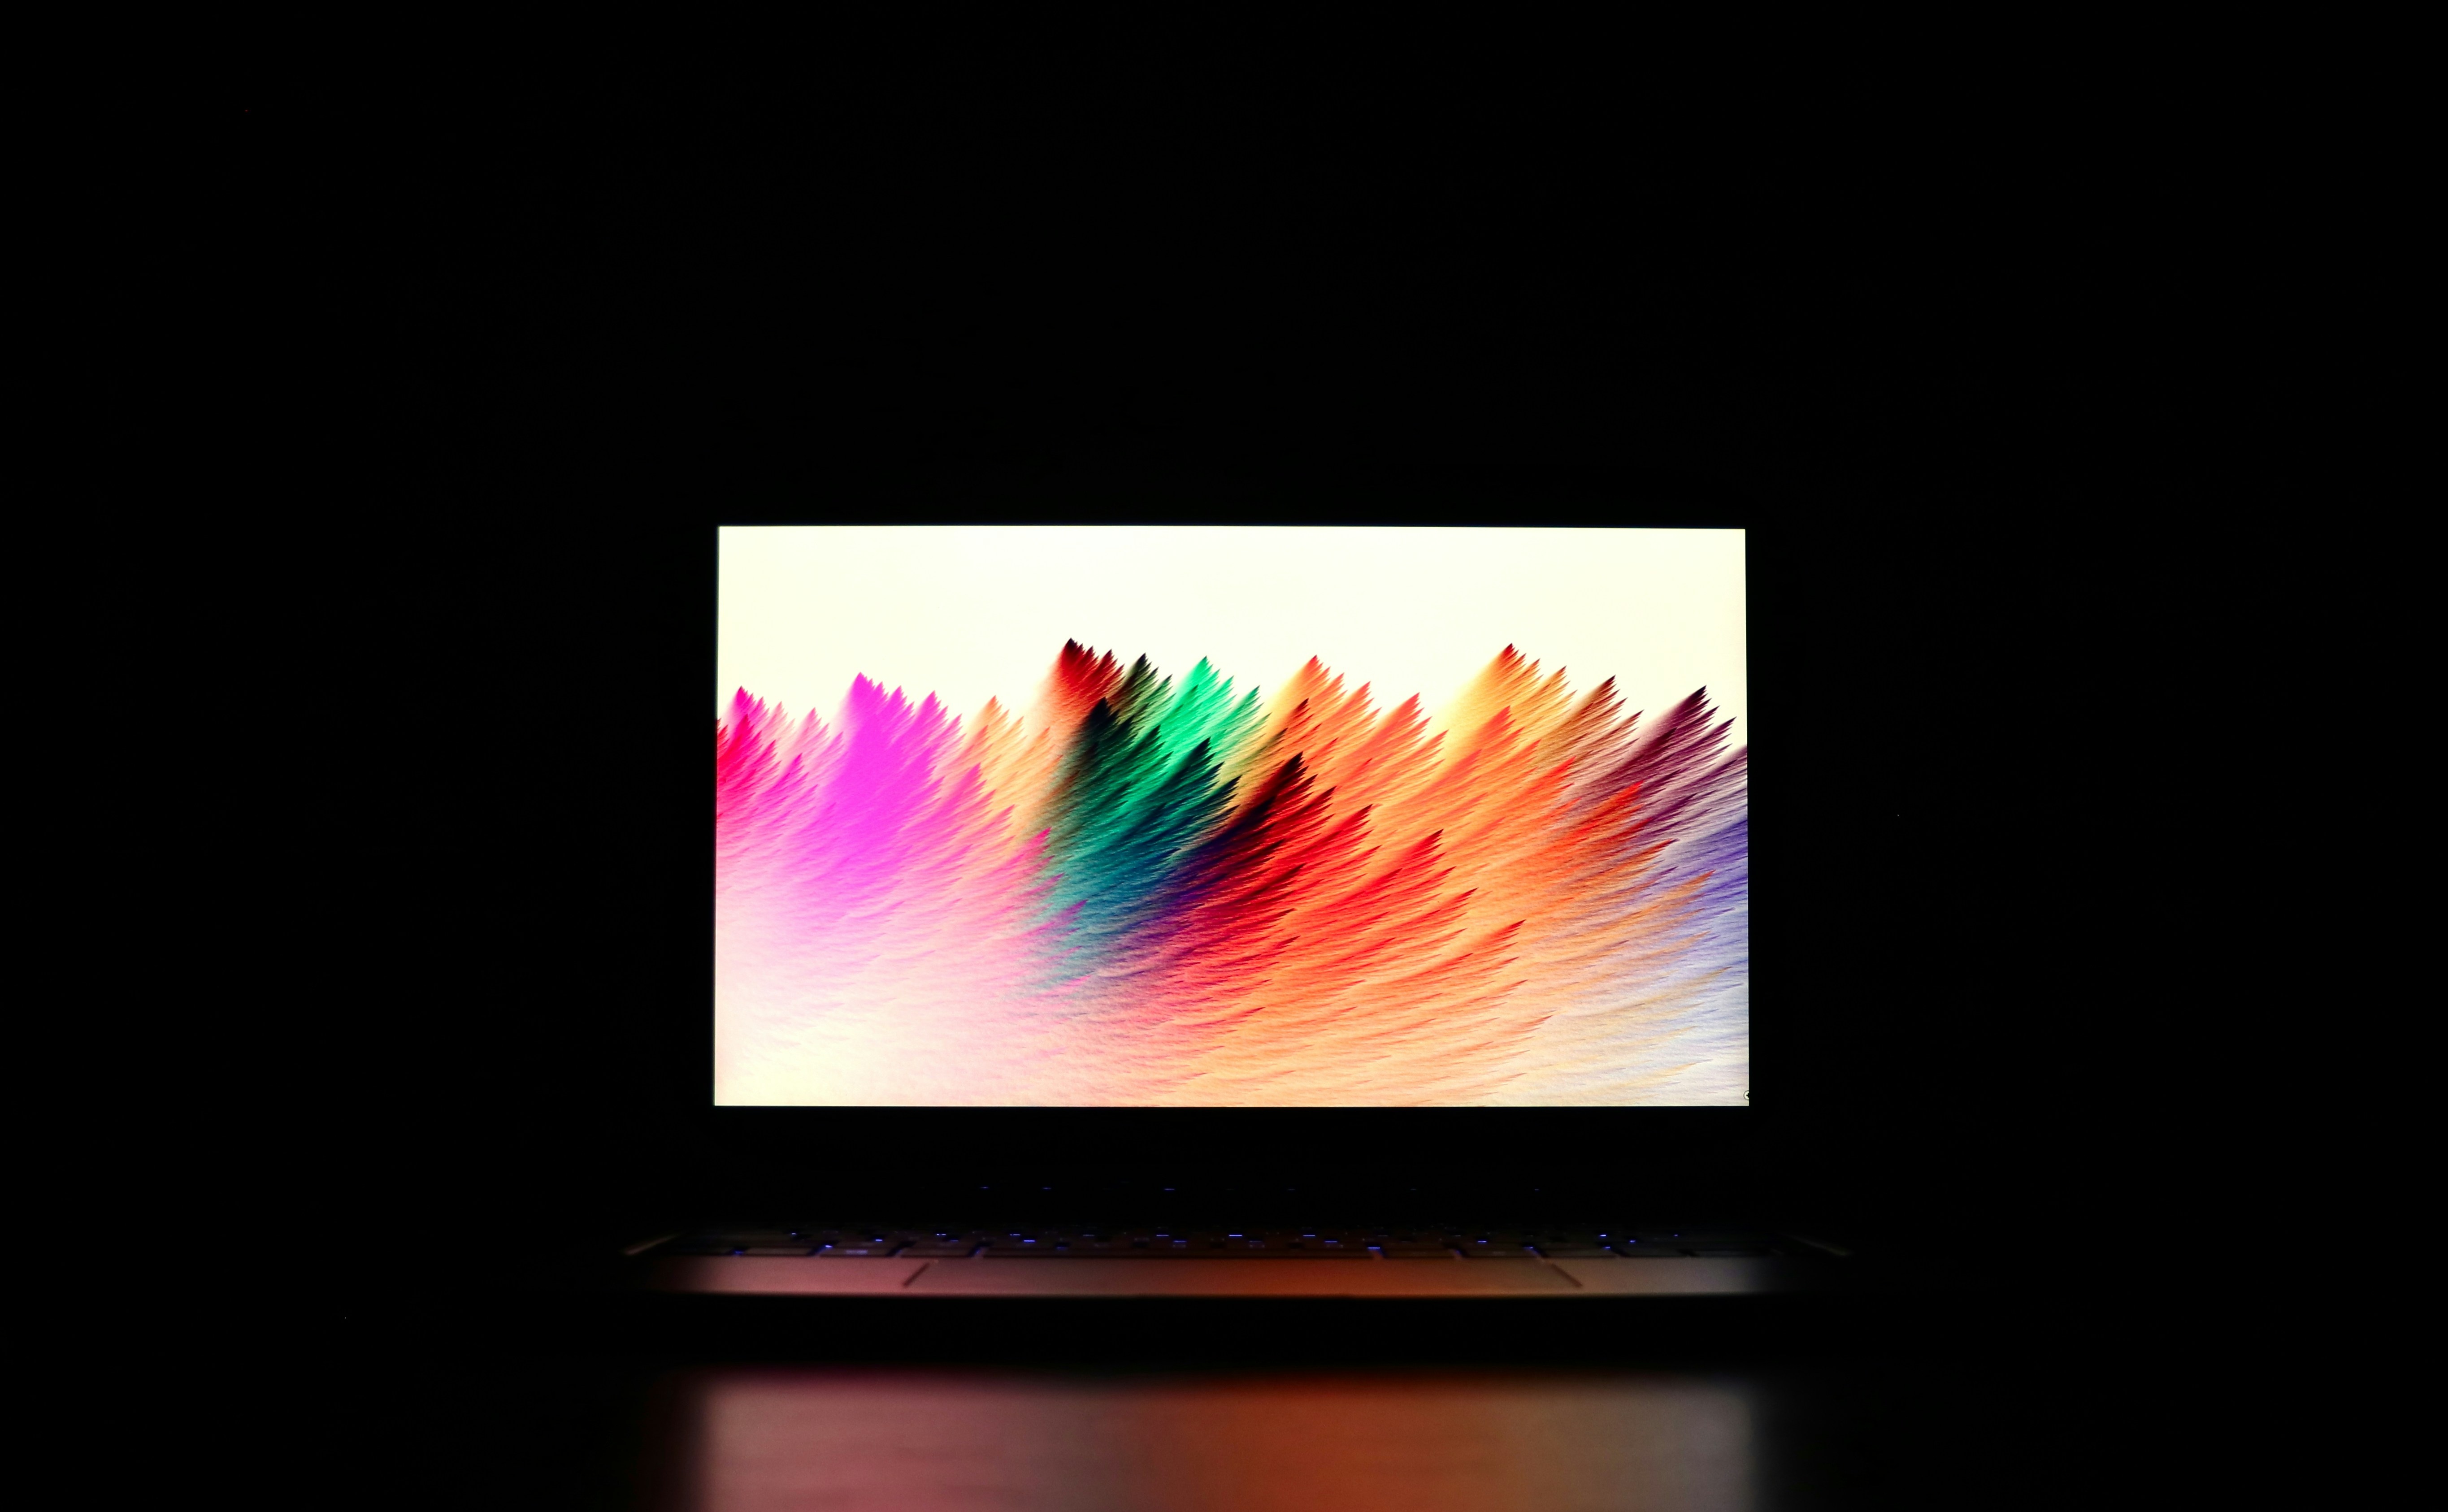 My laptop in a dark environment with a colorful display